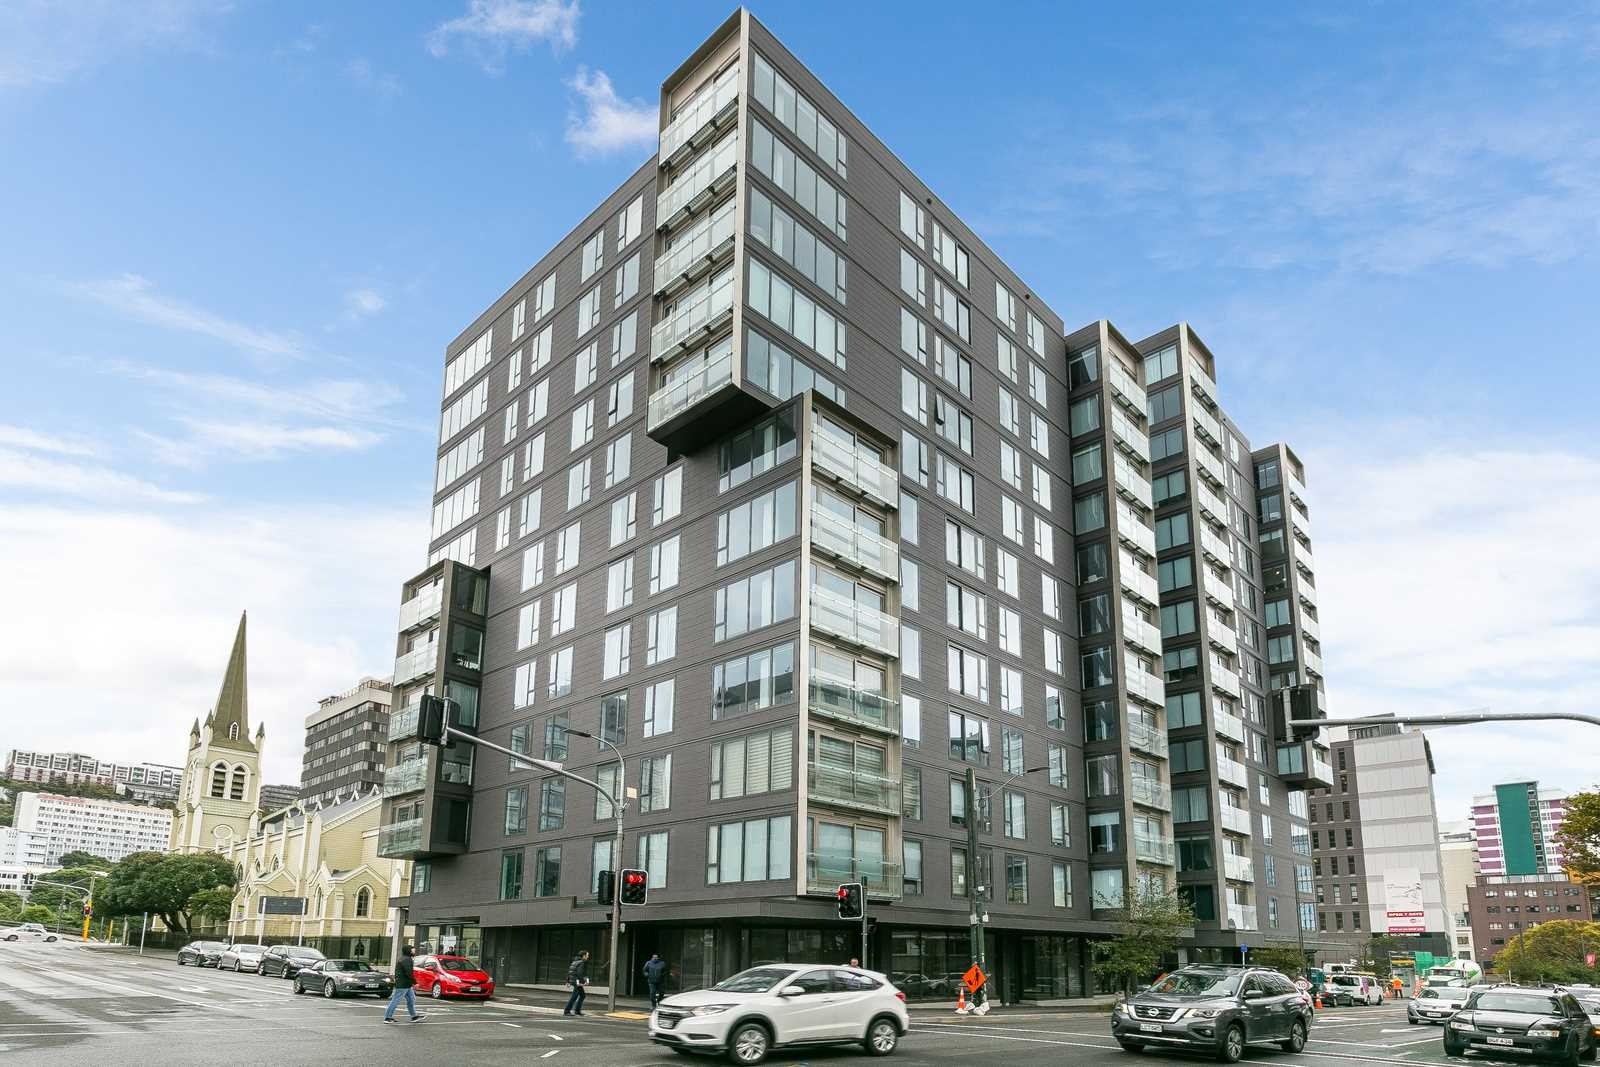 Real Estate For Rent Houses & Apartments : New Victoria Street Apartment, Wellington